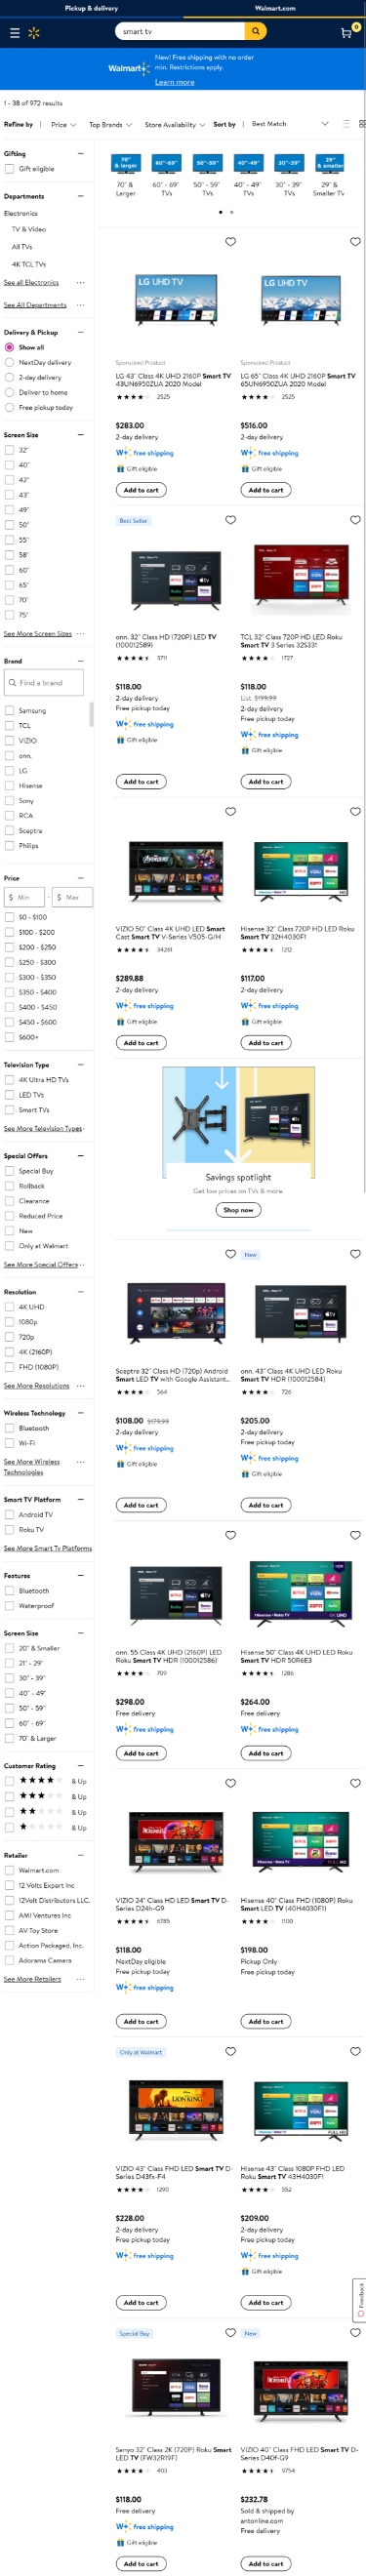 walmart search result page mobile